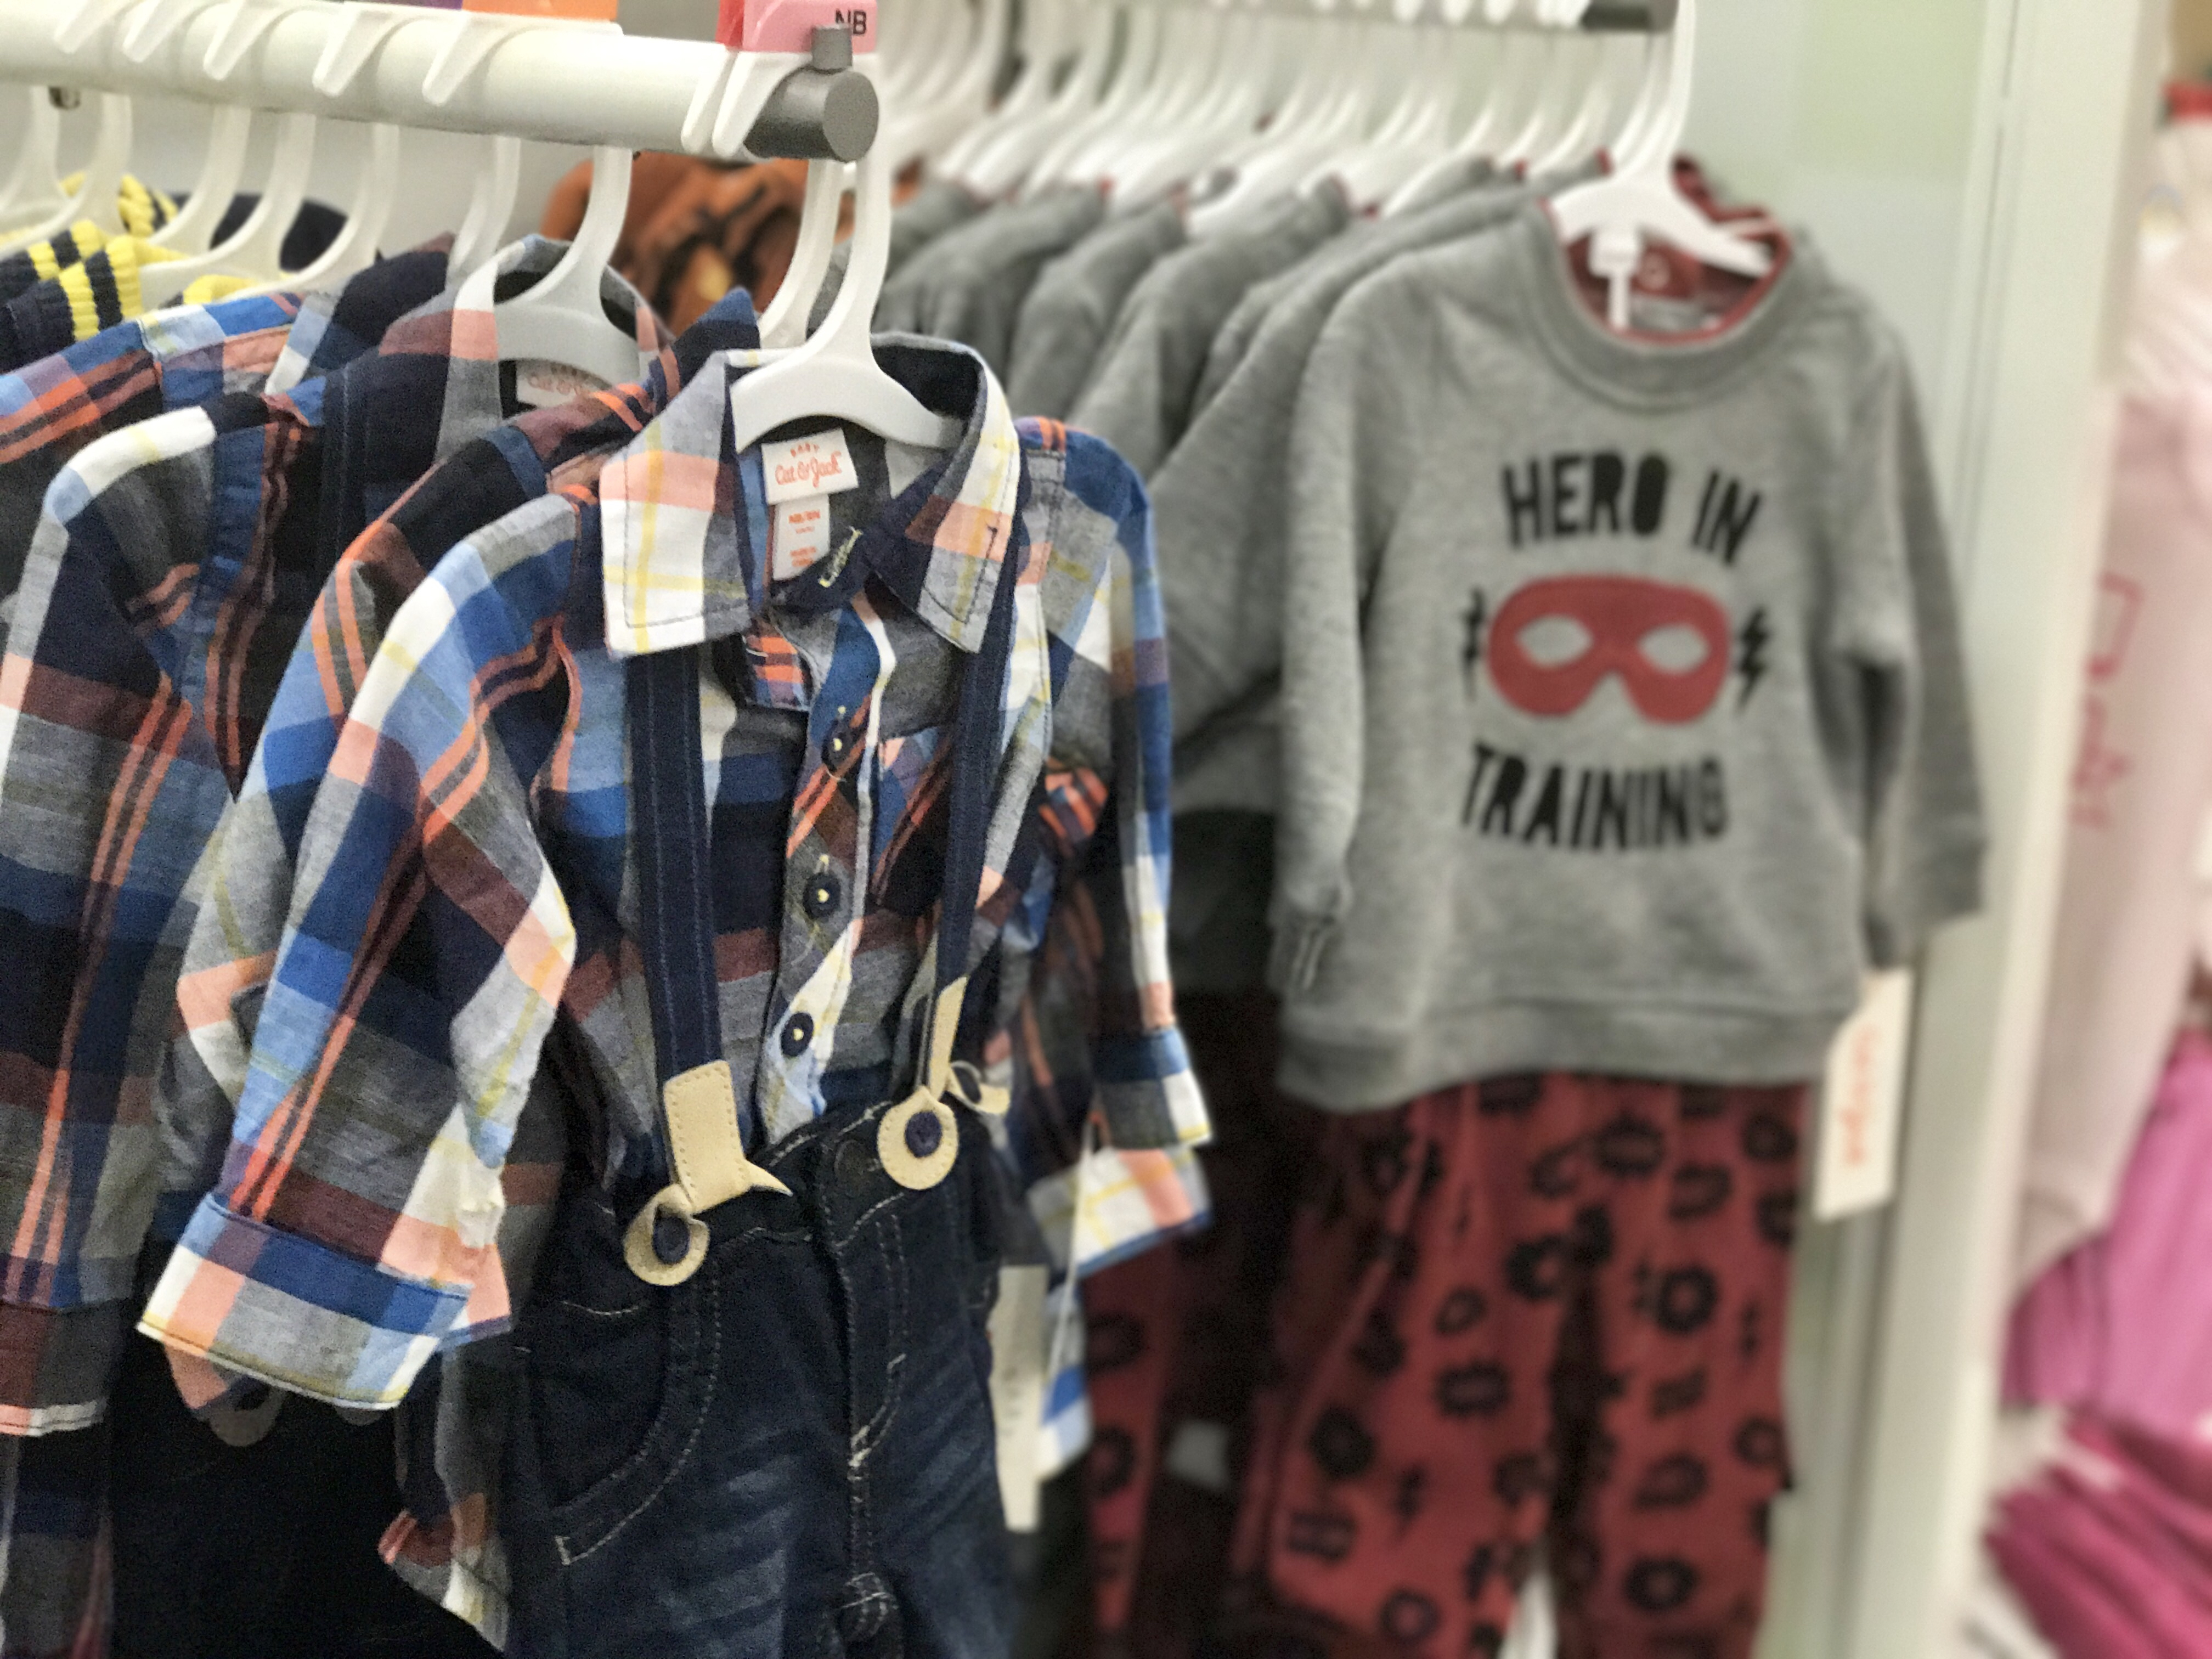 inexpensive kids clothes